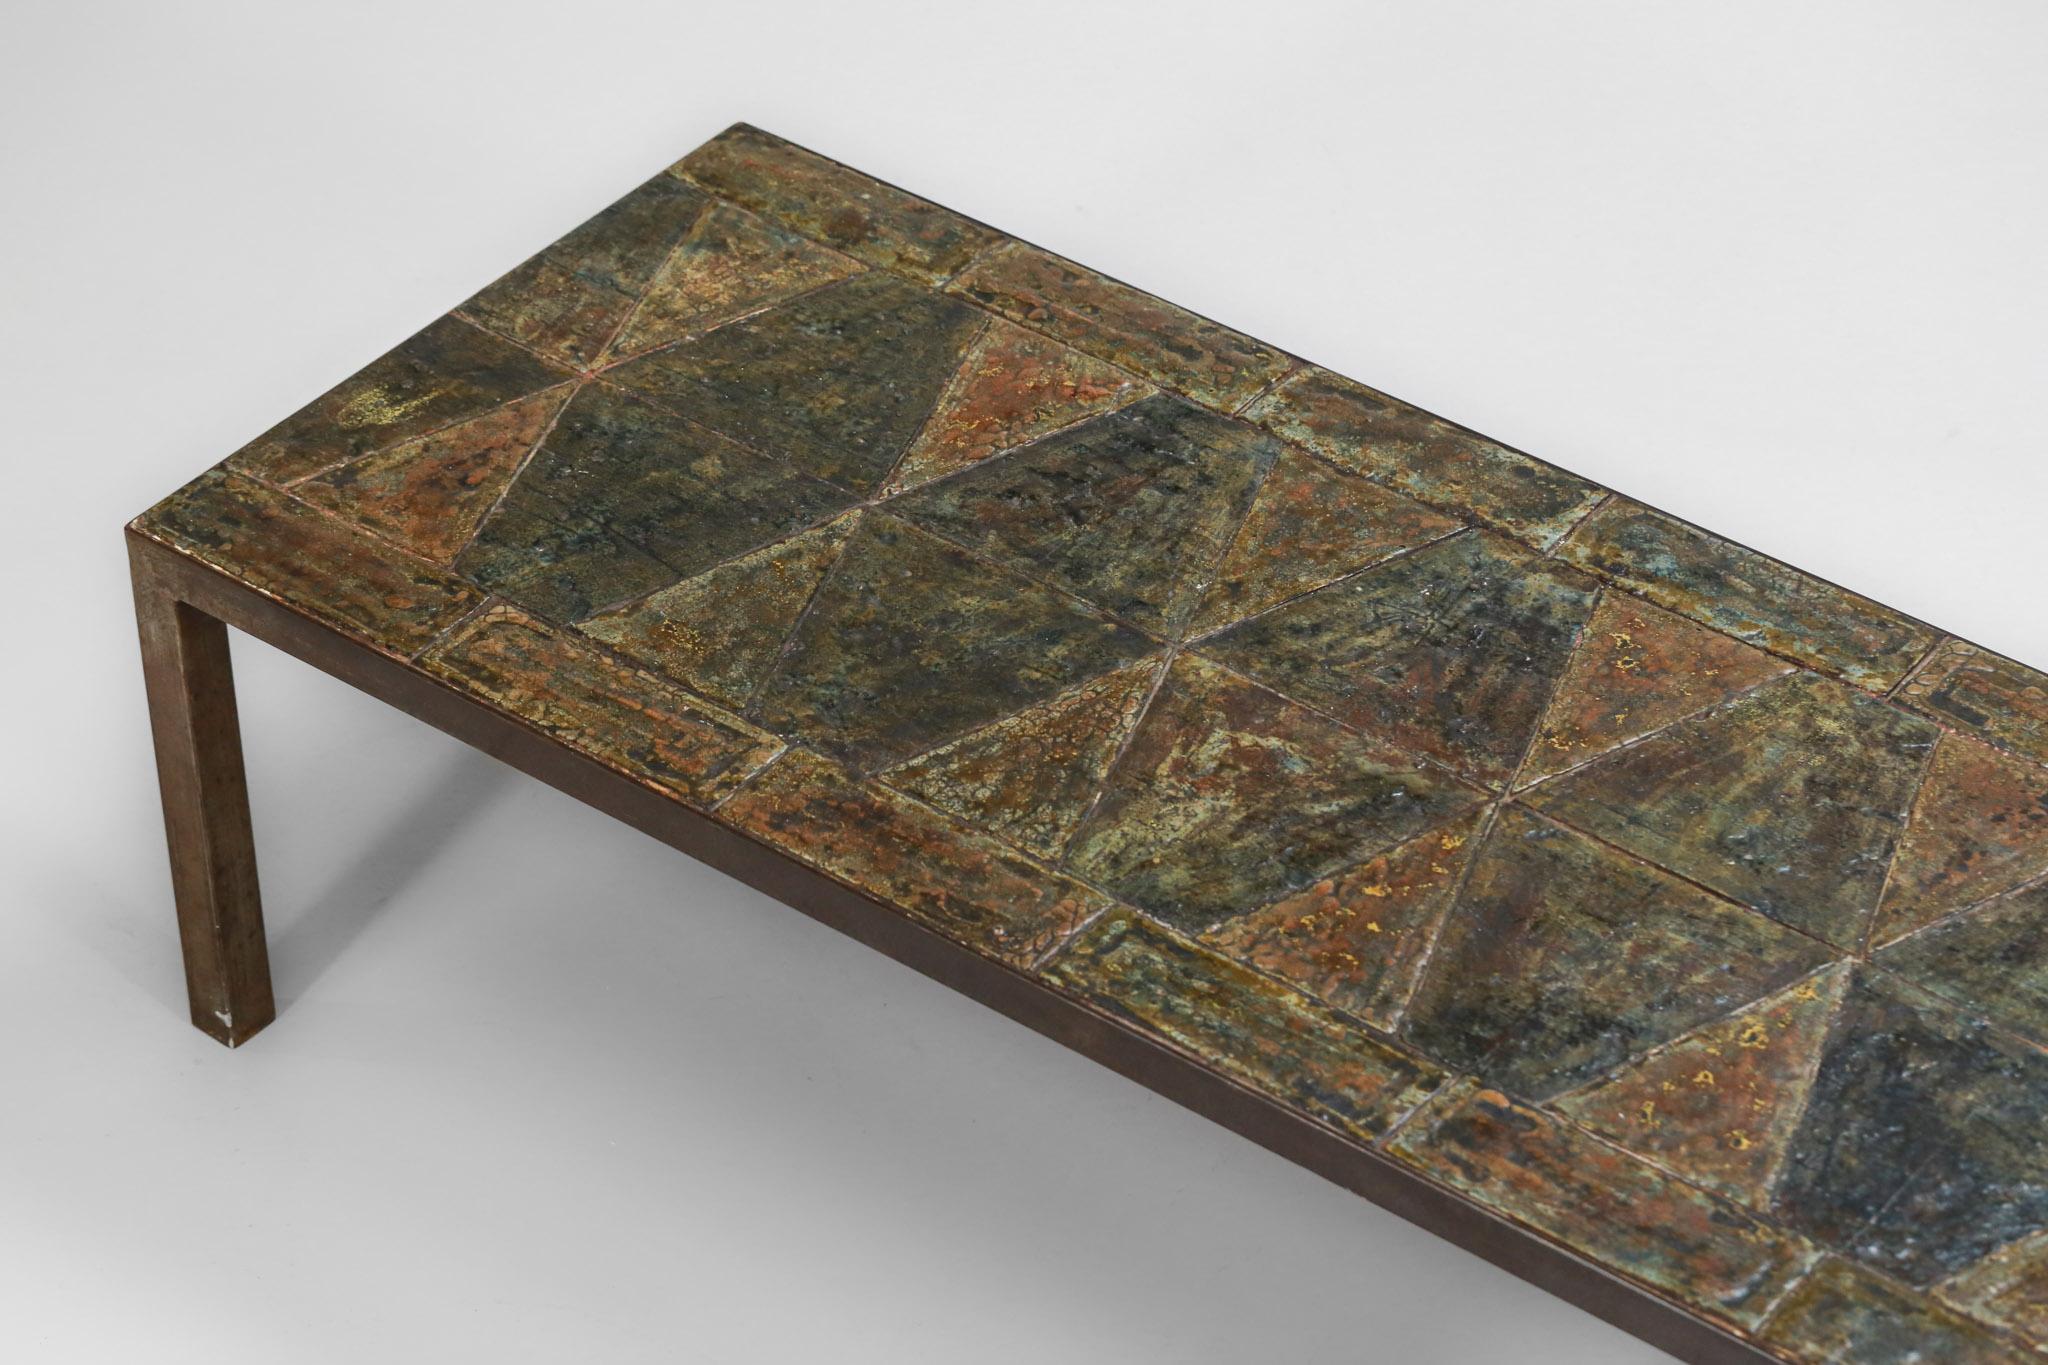 Mid-20th Century Brutalist Coffee Table from the 1960s Made of Enameled Lava Stones French Design